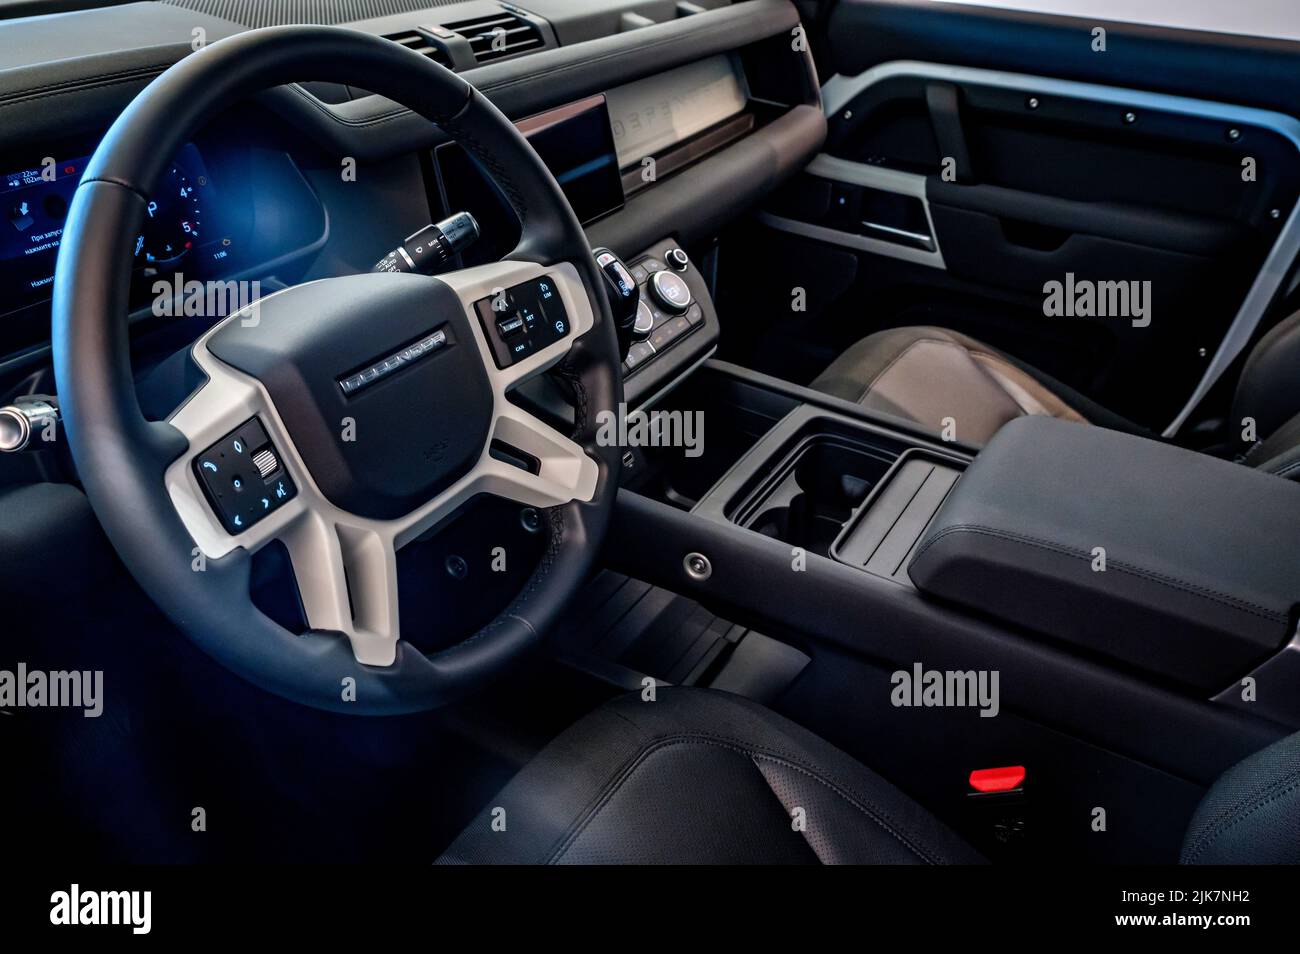 ROSTOV-ON-DON, RUSSIA - 7 DECEMBER 2020: Land Rover Defender, new popular model in dealer centre, view on Dash board and steering wheel. Selective foc Stock Photo